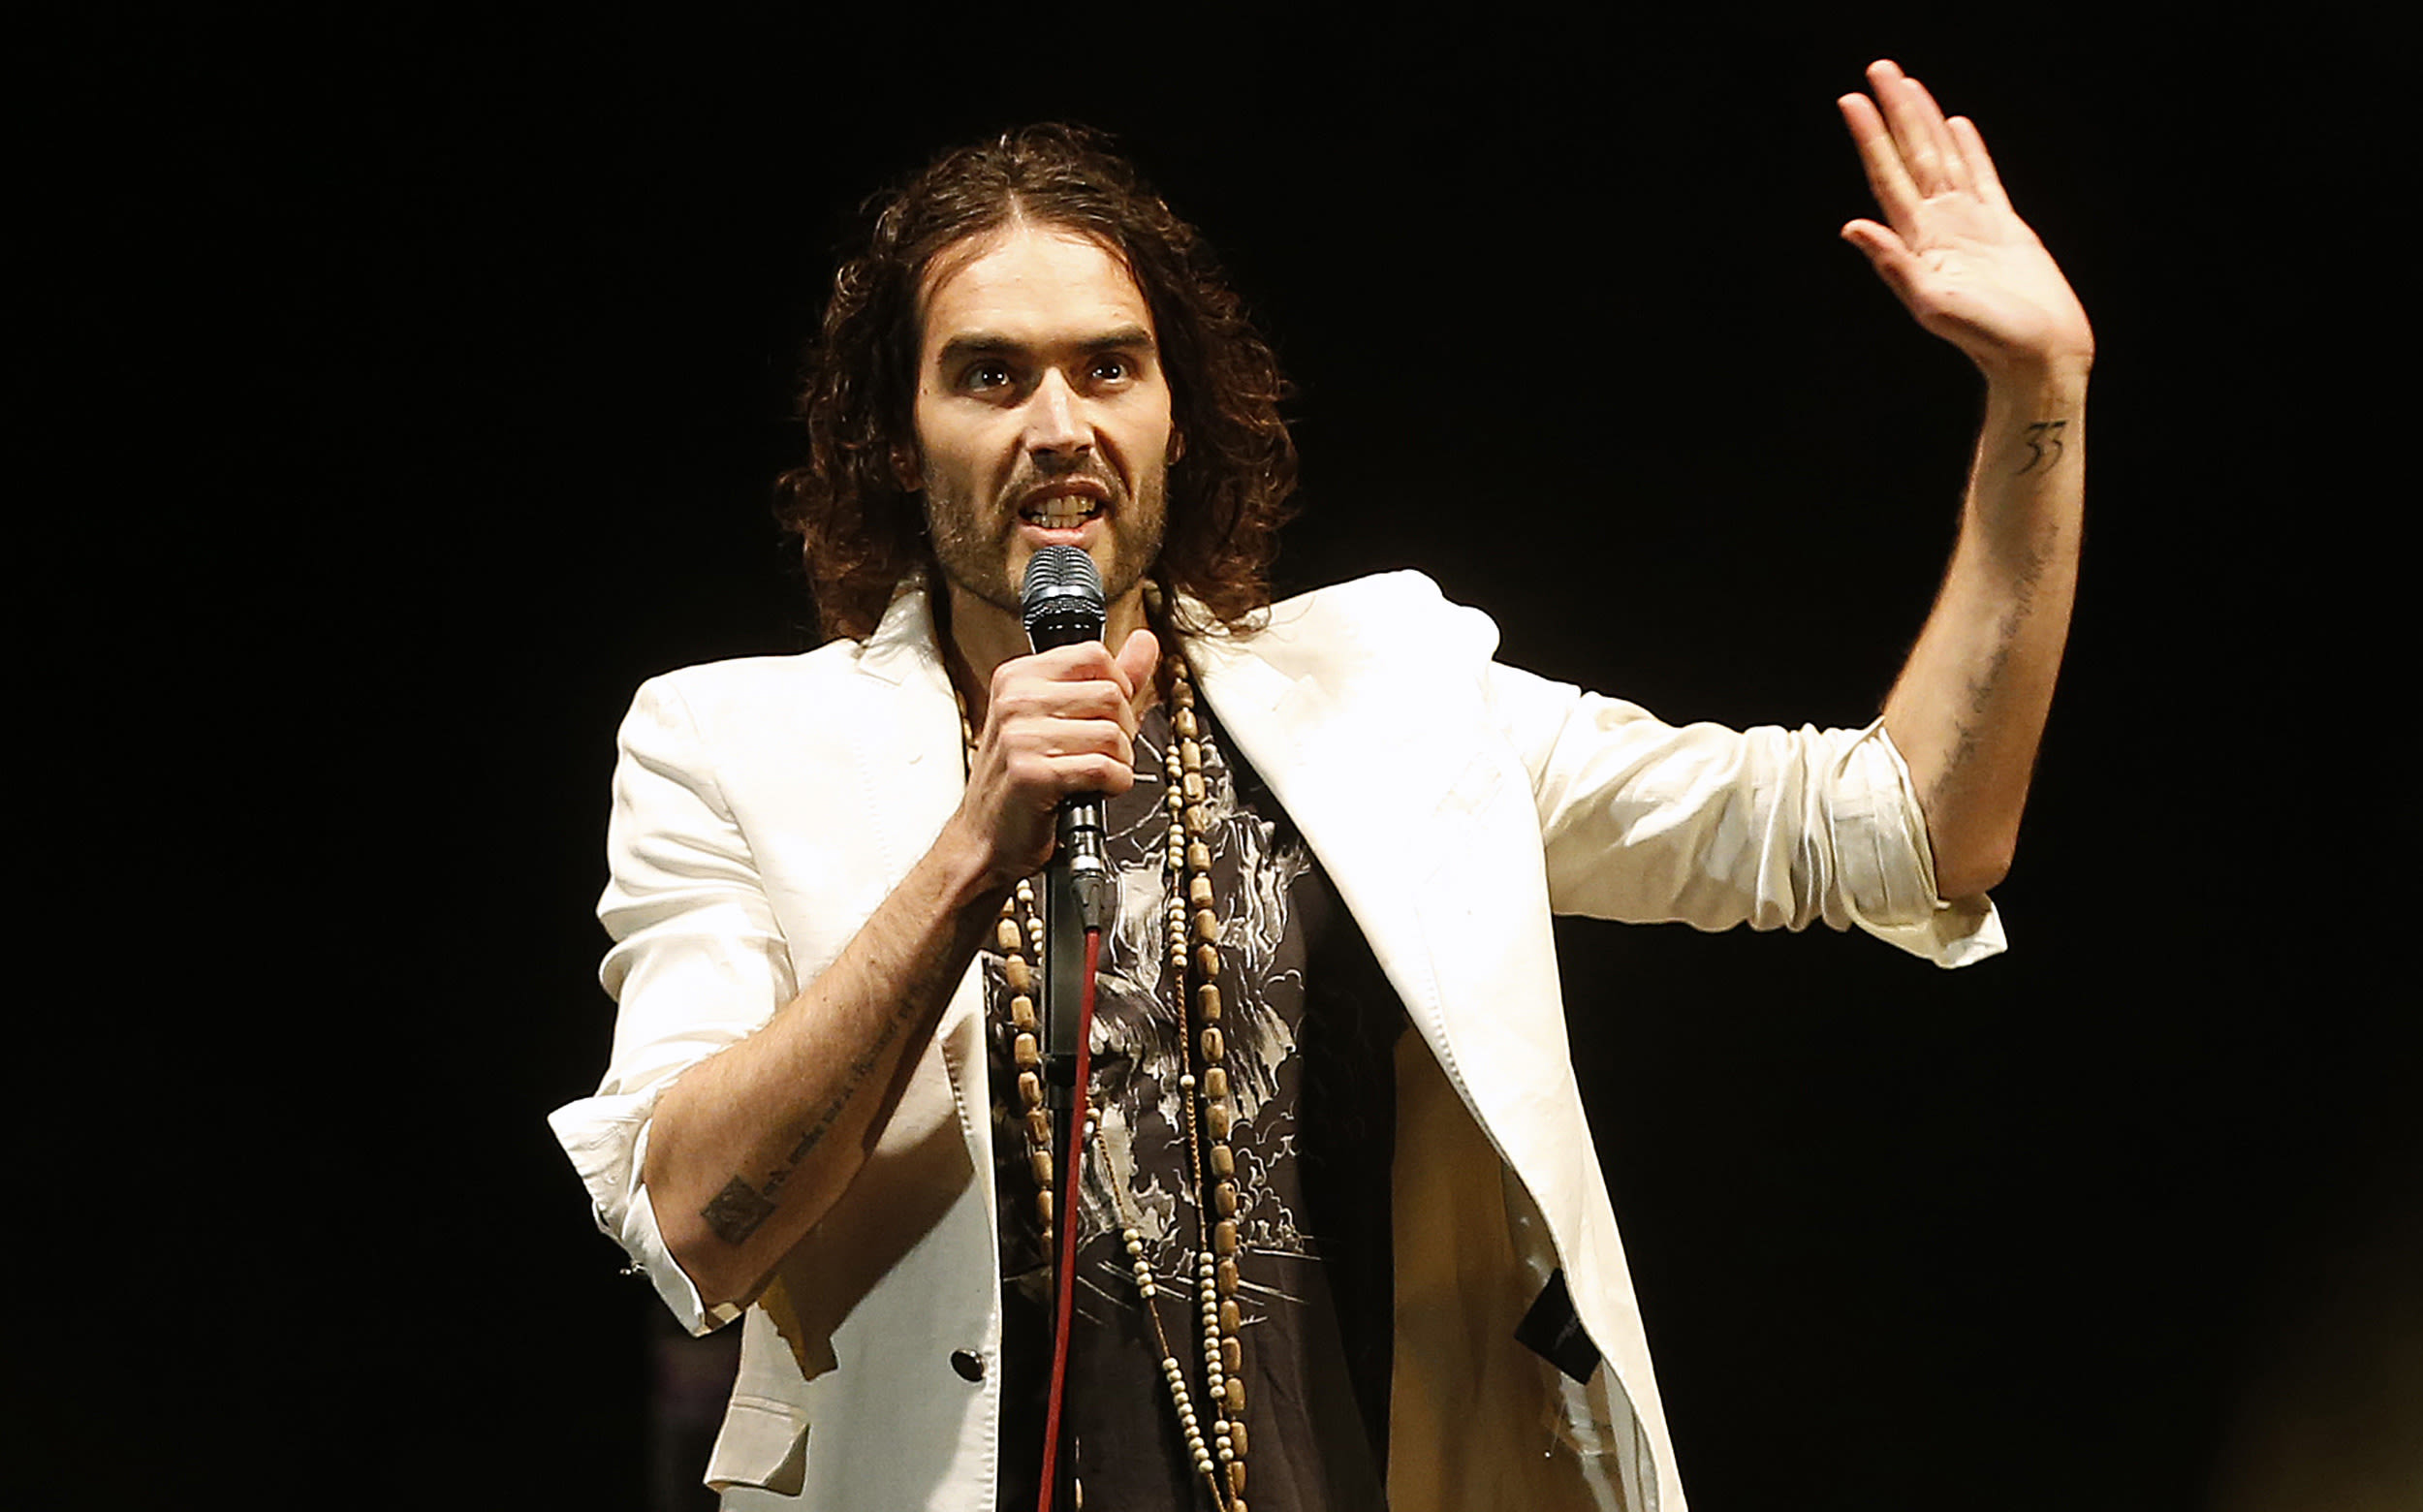 Russell Brand says Bear Grylls 'flanked' him as he was baptised in Thames